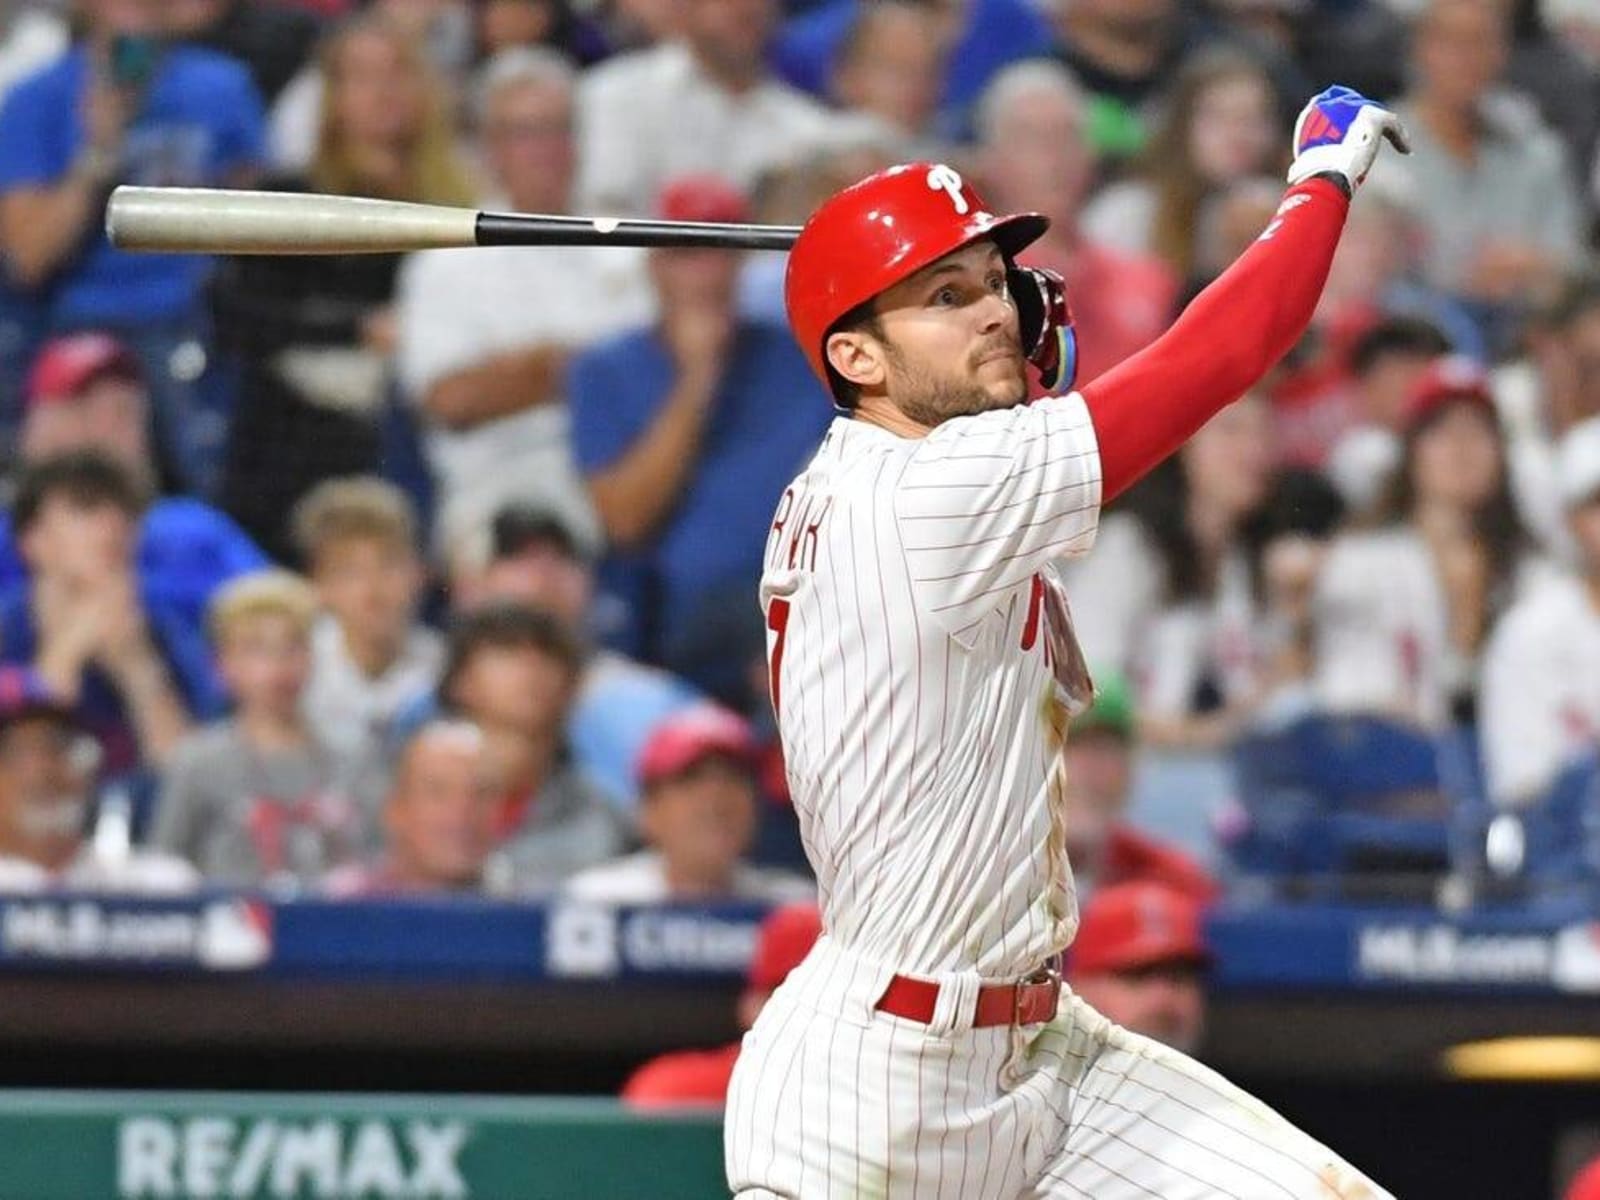 Phillies bid to flex offensive muscle vs. Brewers